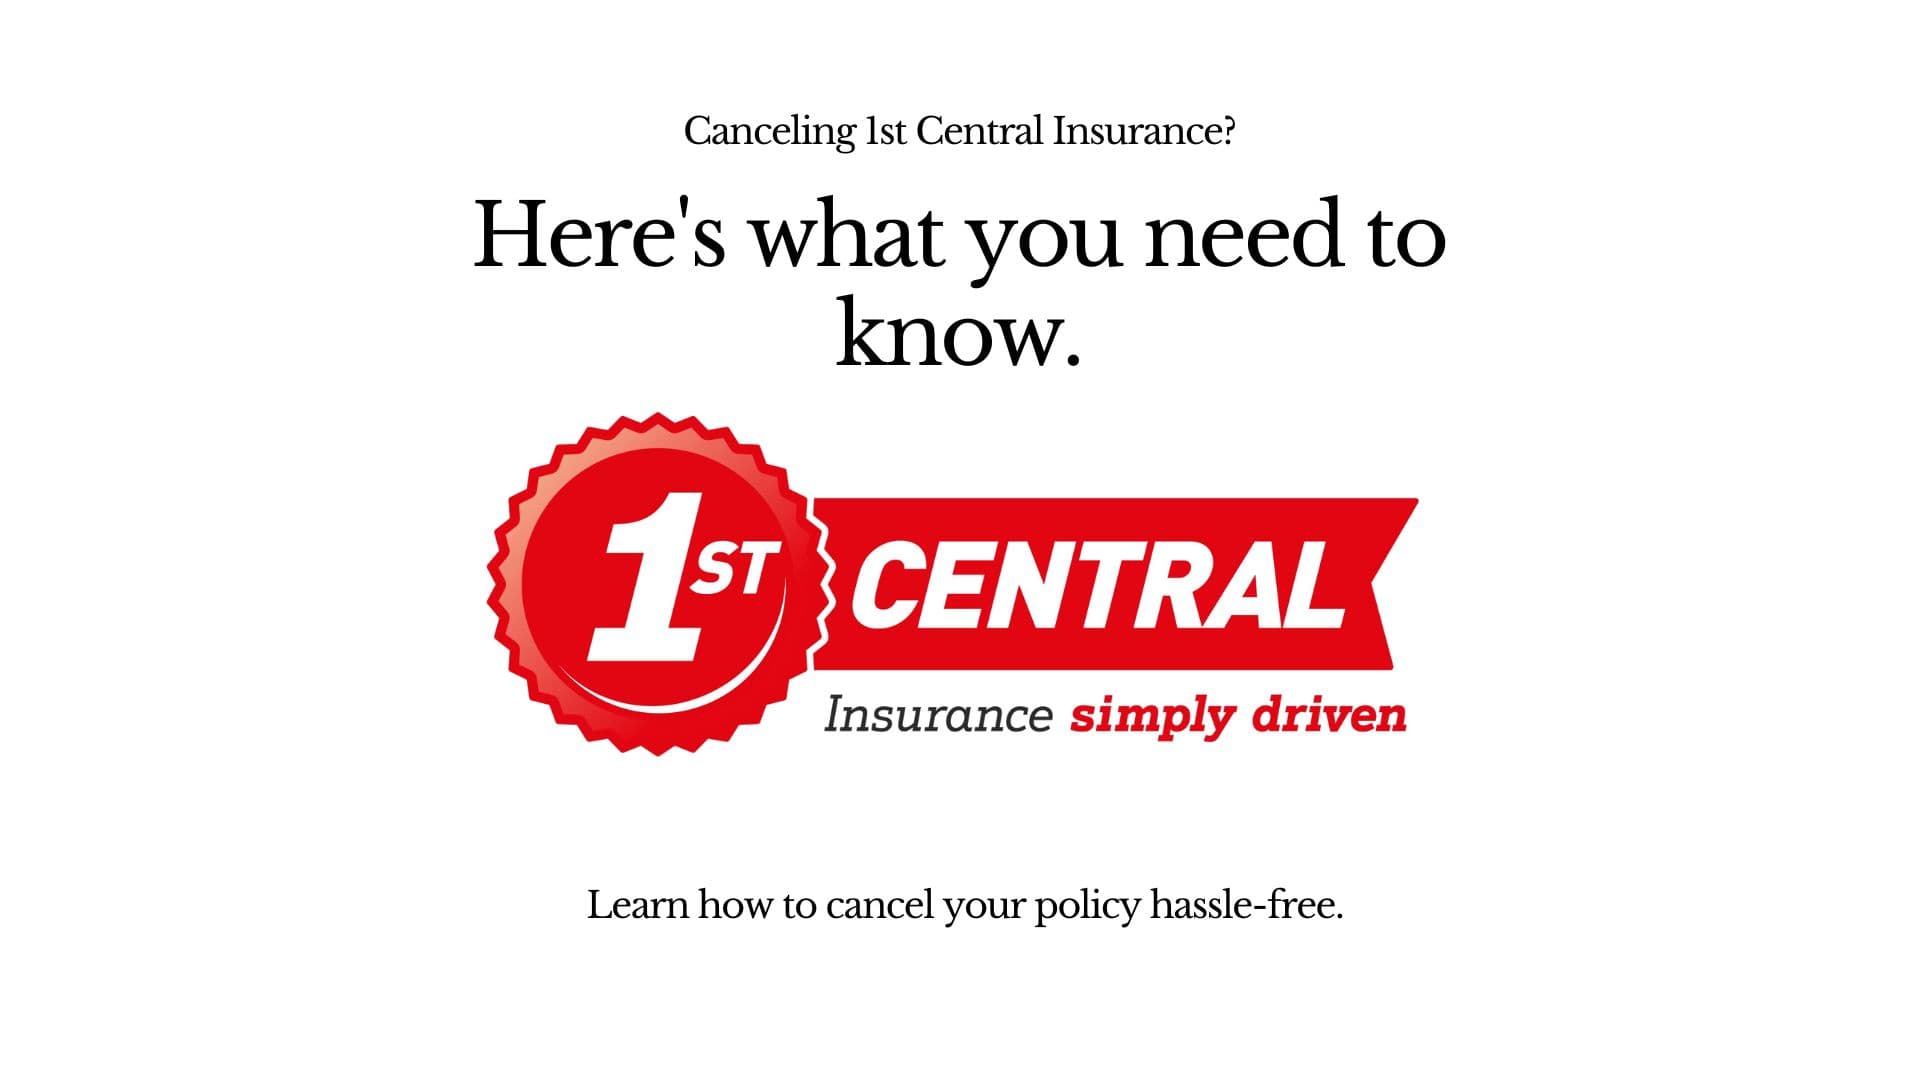 How to Cancel 1st Central Insurance